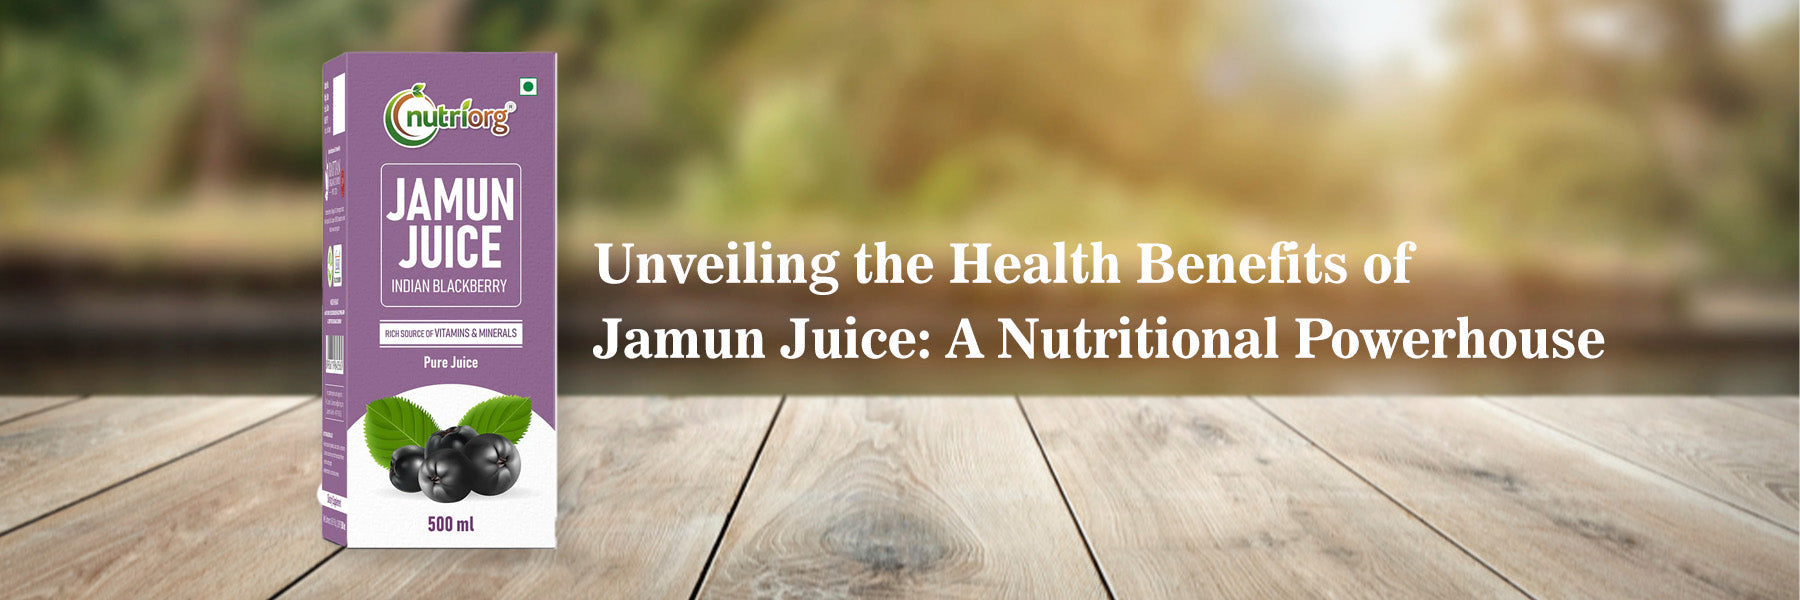 Unveiling the Health Benefits of Jamun Juice: A Nutritional Powerhouse FromIndia.com